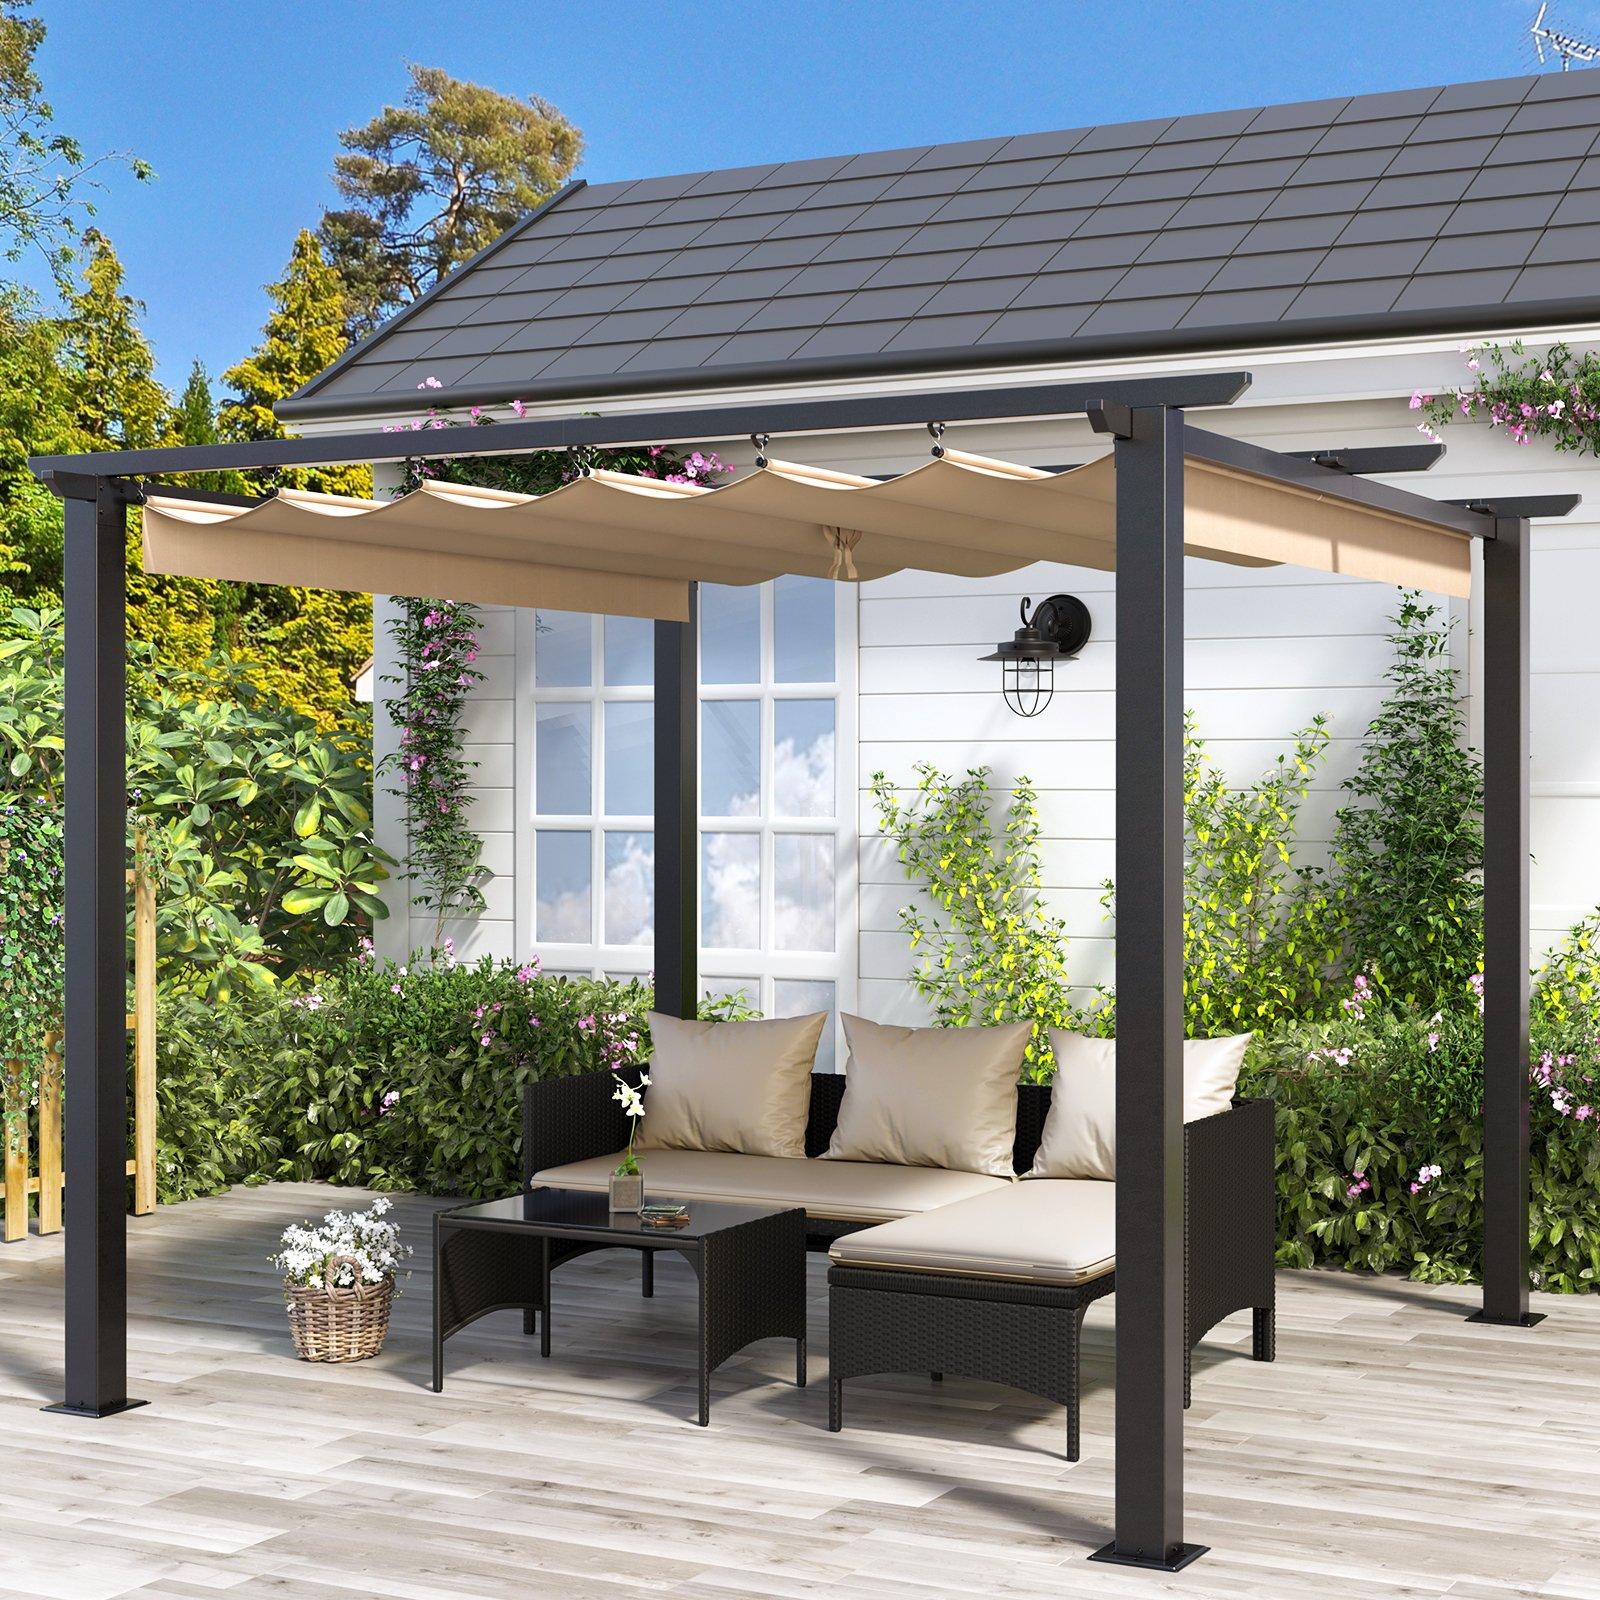 3x3M Outdoor Retractable Pergola with Canopy Patio Metal Shelter for Garden Lawn Patio